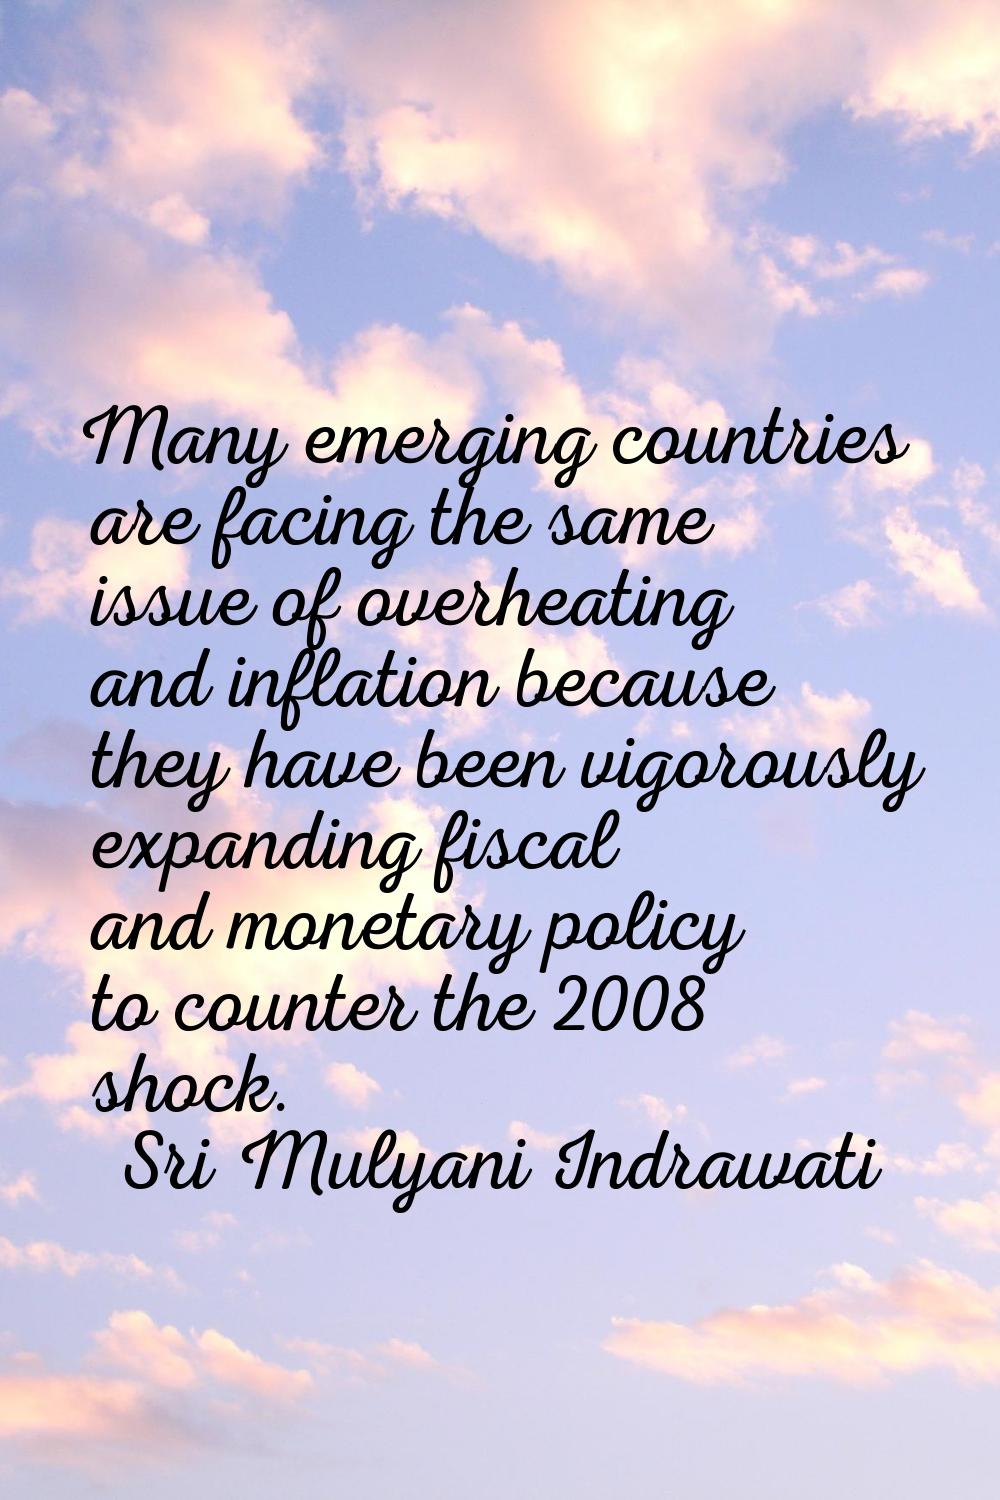 Many emerging countries are facing the same issue of overheating and inflation because they have be